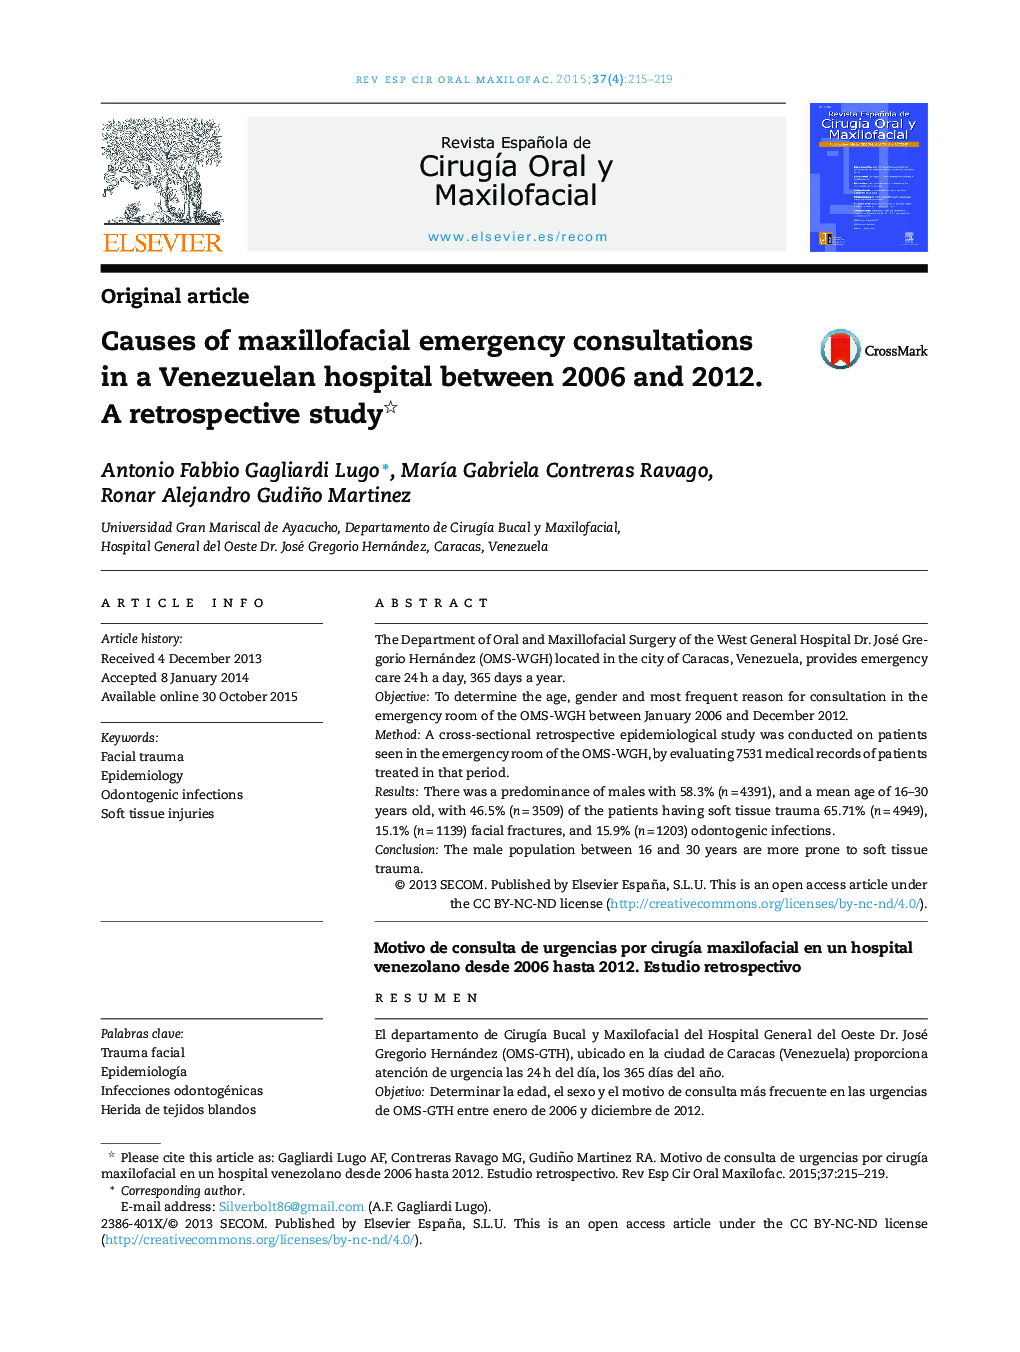 Causes of maxillofacial emergency consultations in a Venezuelan hospital between 2006 and 2012. A retrospective study 